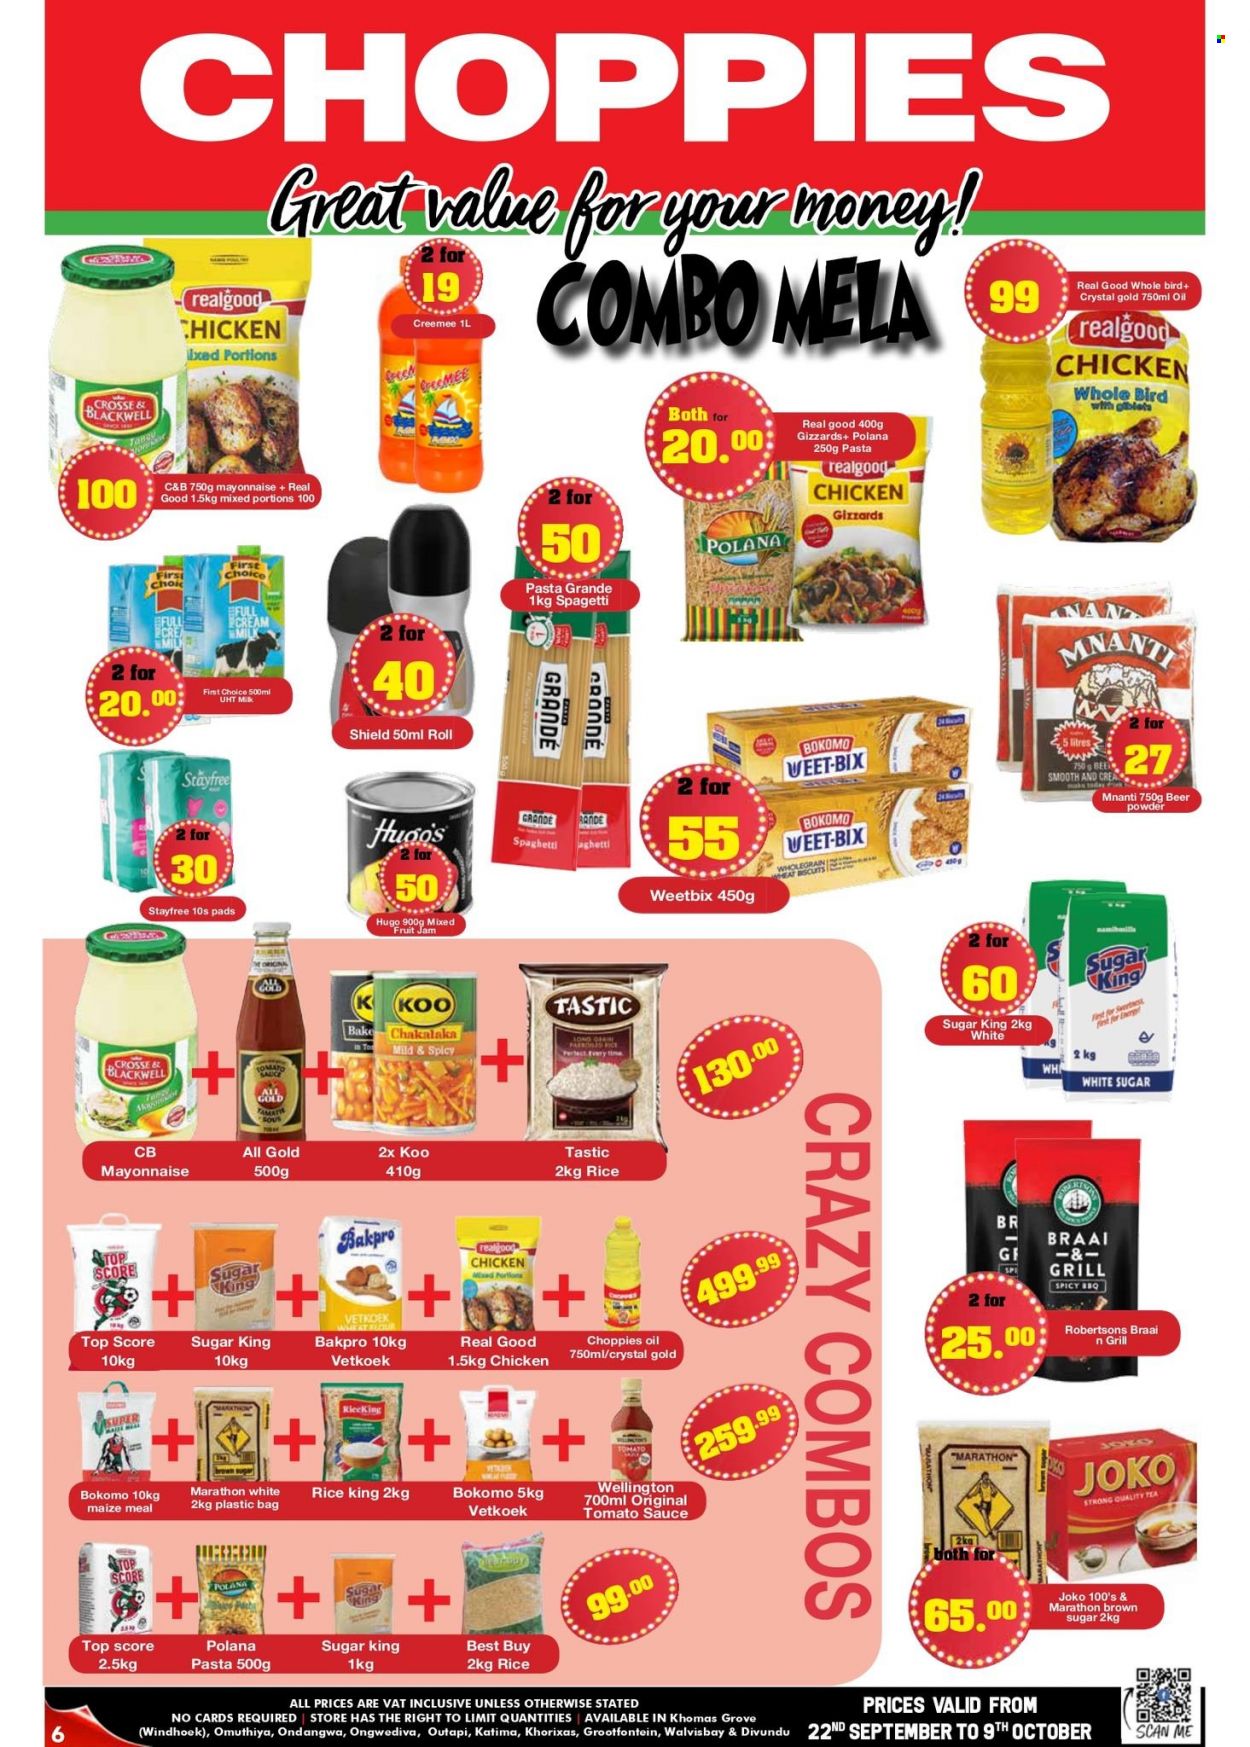 thumbnail - Choppies catalogue  - 22/09/2022 - 09/10/2022 - Sales products - spaghetti, pasta, sauce, chakalaka, mayonnaise, cereal bar, biscuit, cane sugar, flour, wheat flour, maize meal, tomato sauce, Koo, Weet-Bix, rice, Tastic, Pasta Grandé, oil, fruit jam, tea, Joko, beer, whole chicken, chicken gizzards, Stayfree. Page 6.